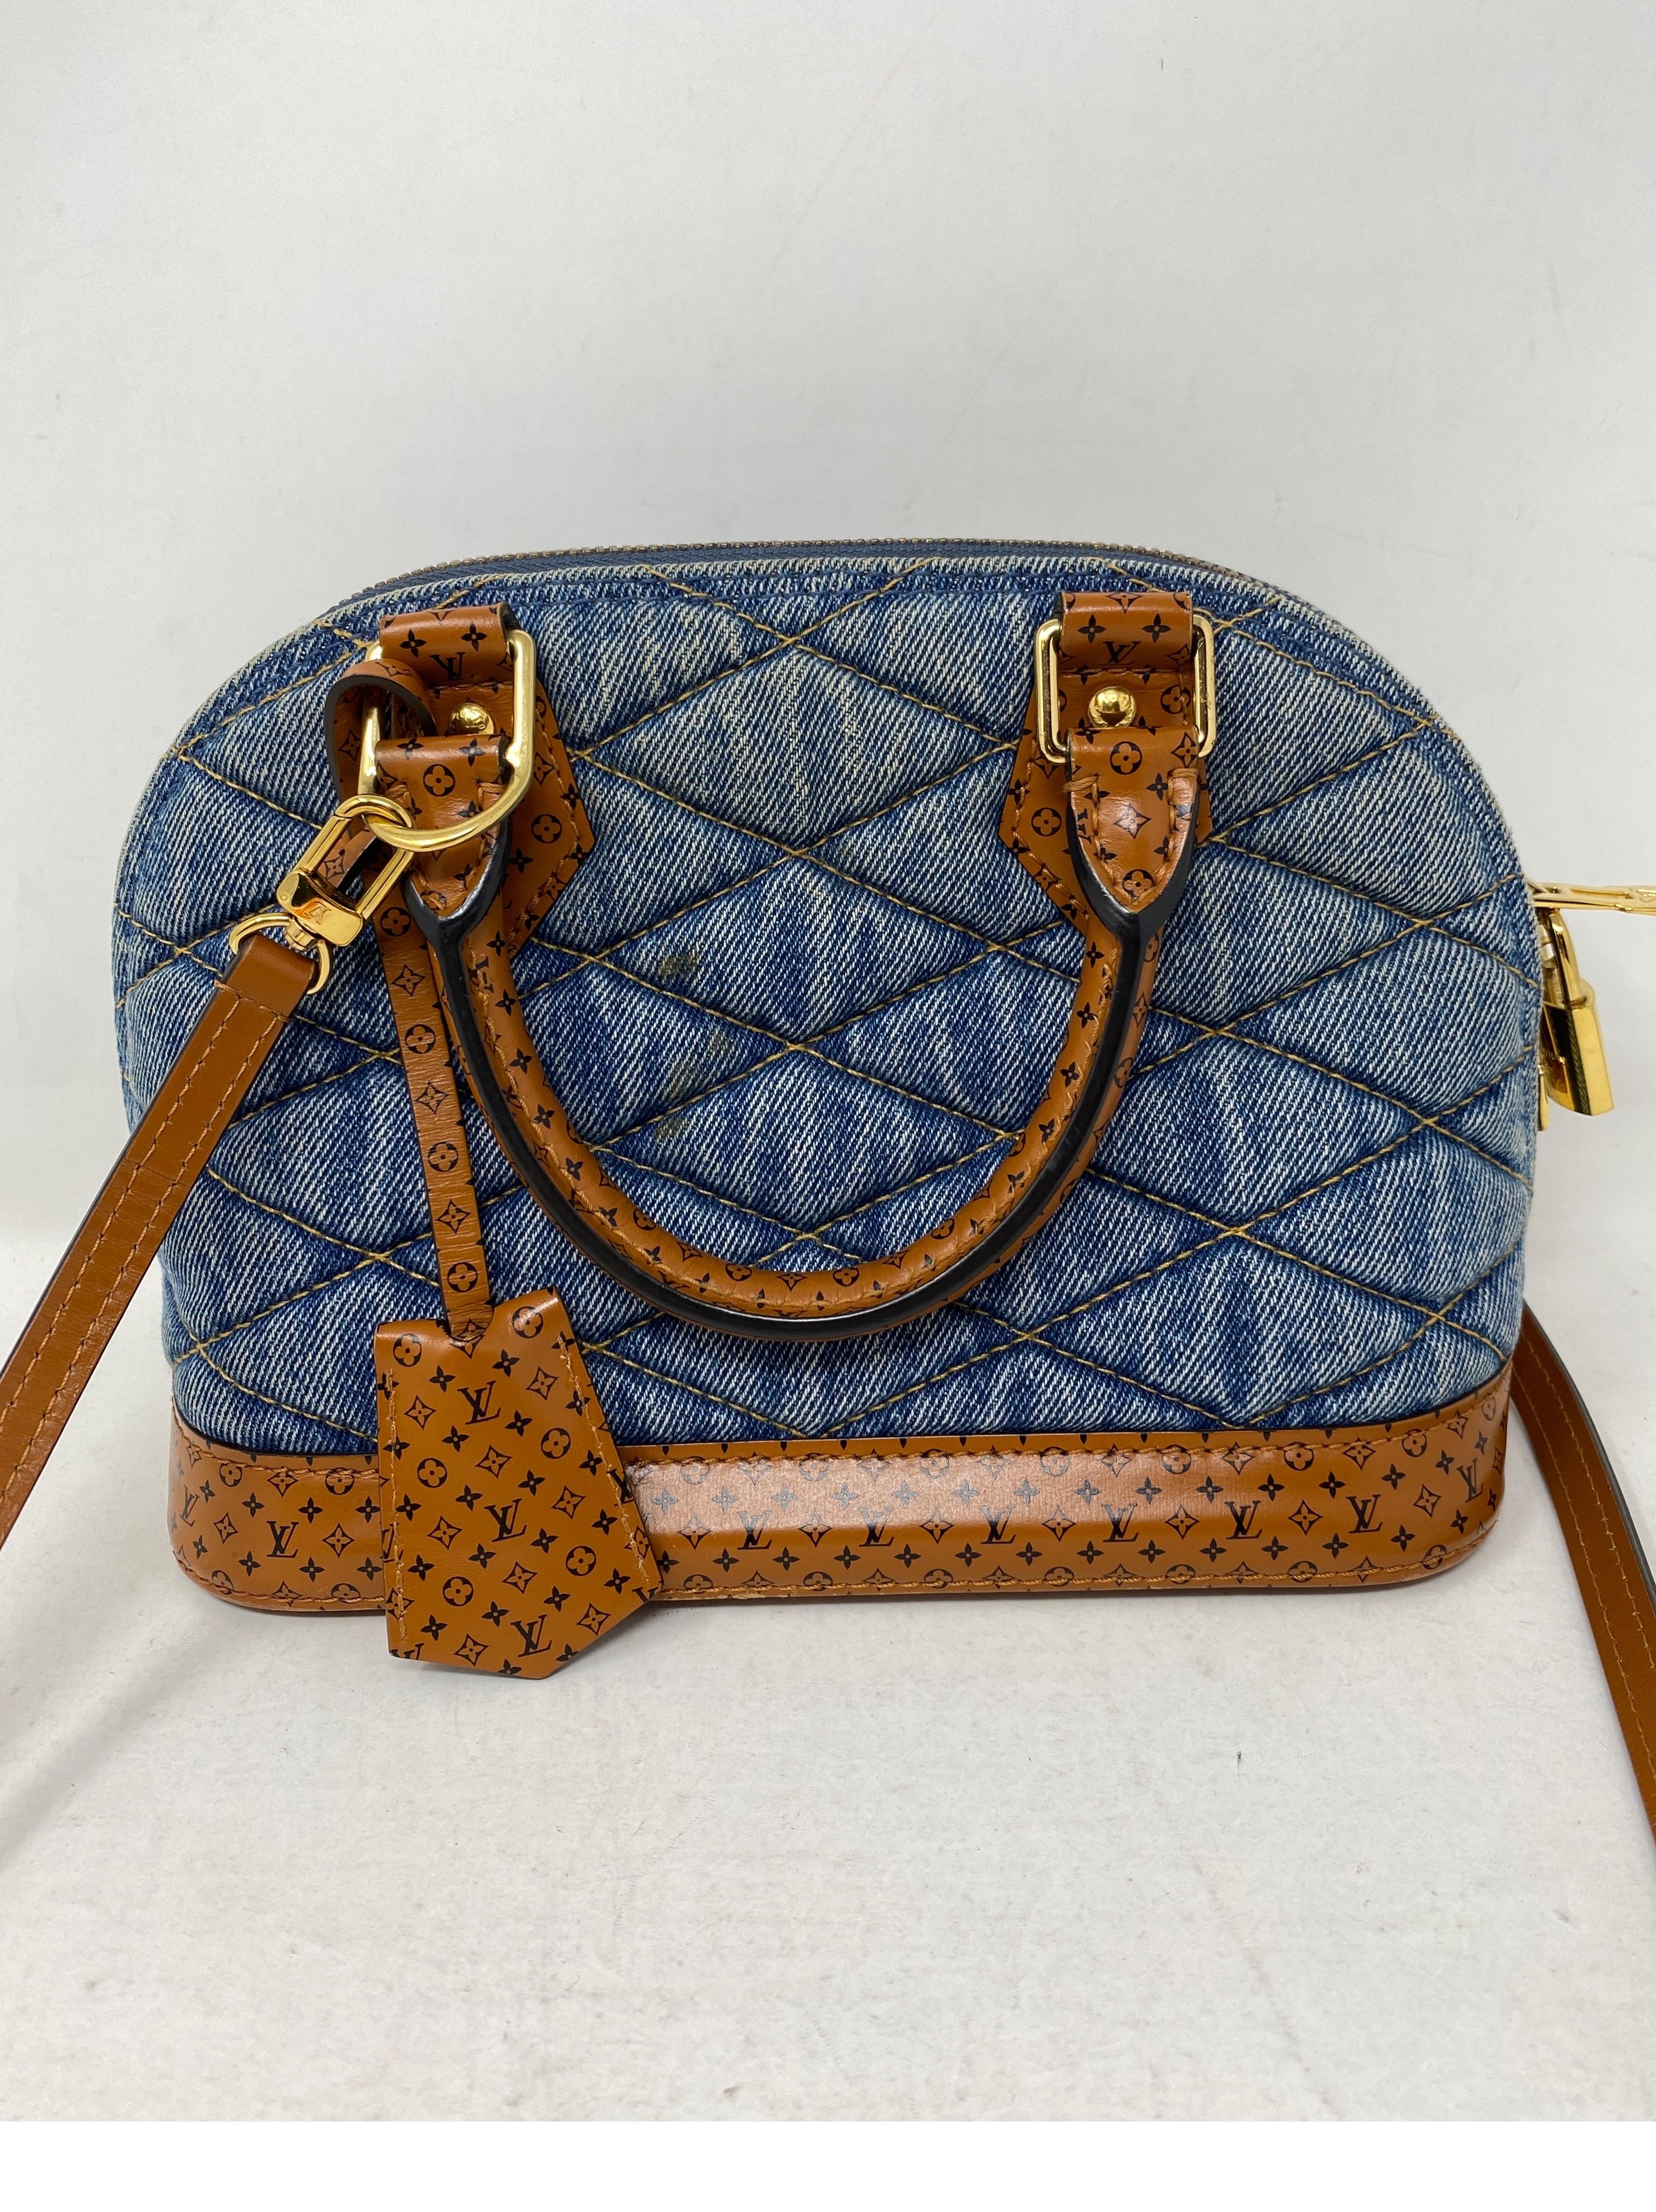 Louis Vuitton Denim and Leather Alma BB Bag. Excellent condition. Rare and limited. Cute mini size bag. Can be worn crossbody or a top handle bag. Guaranteed authentic. 